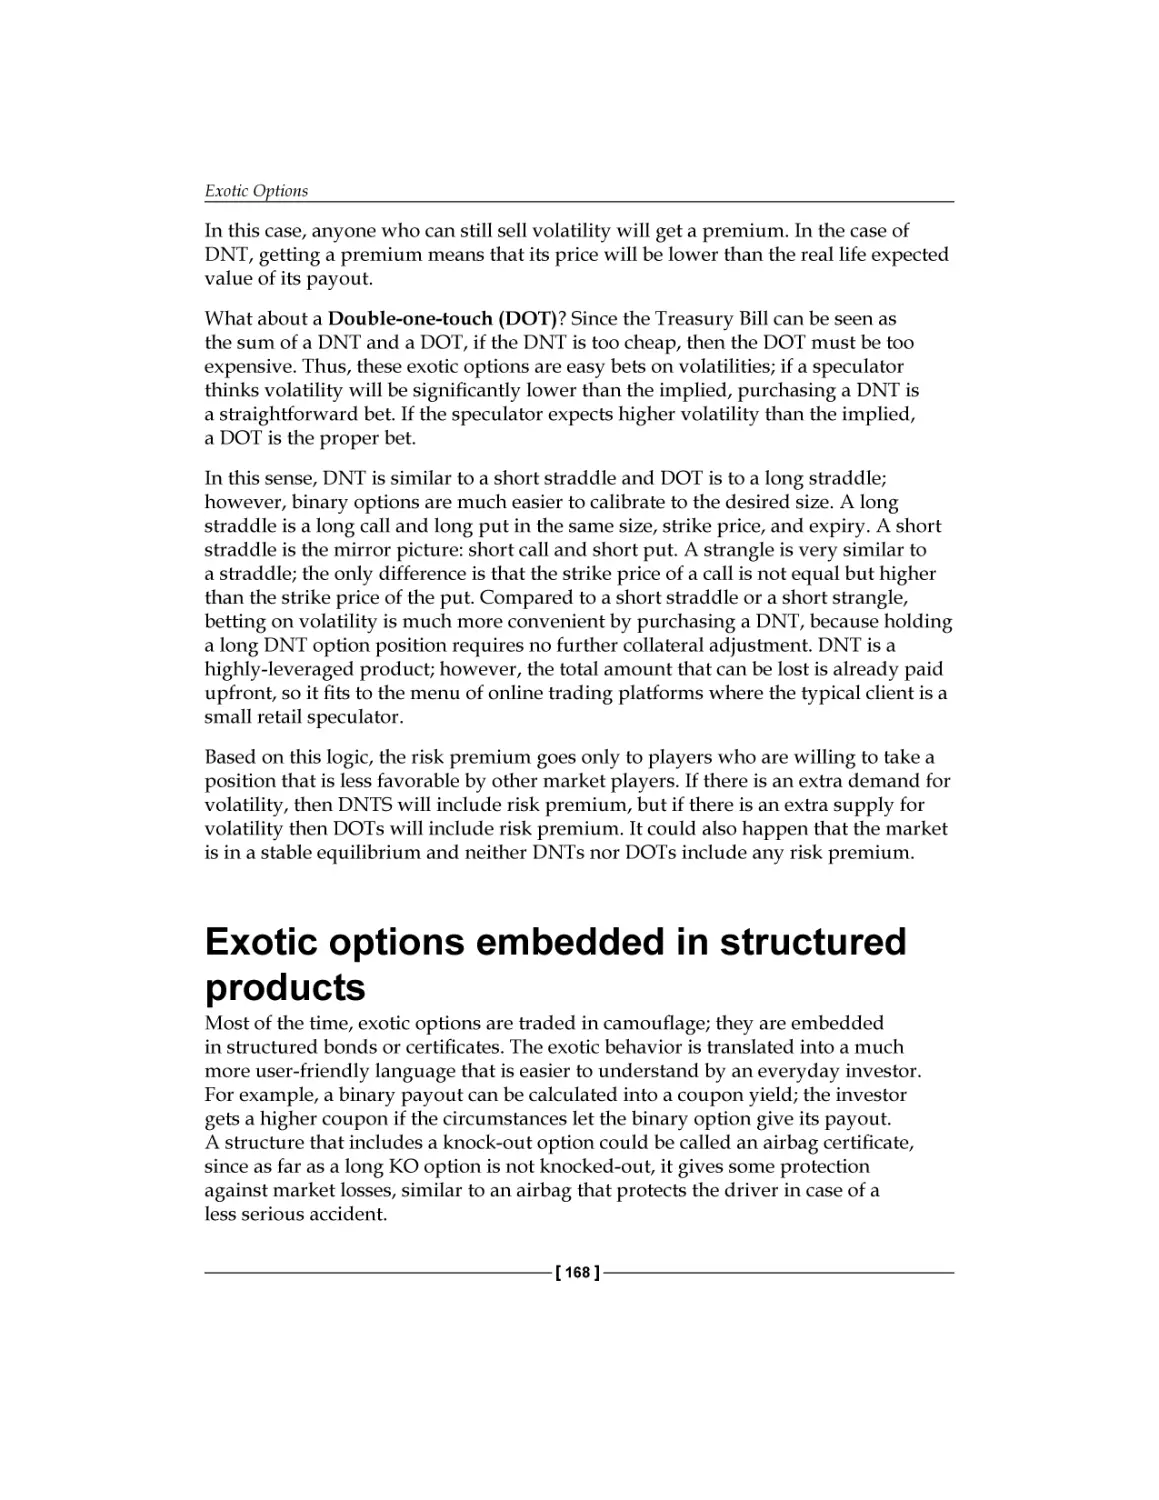 Exotic options embedded in structured products